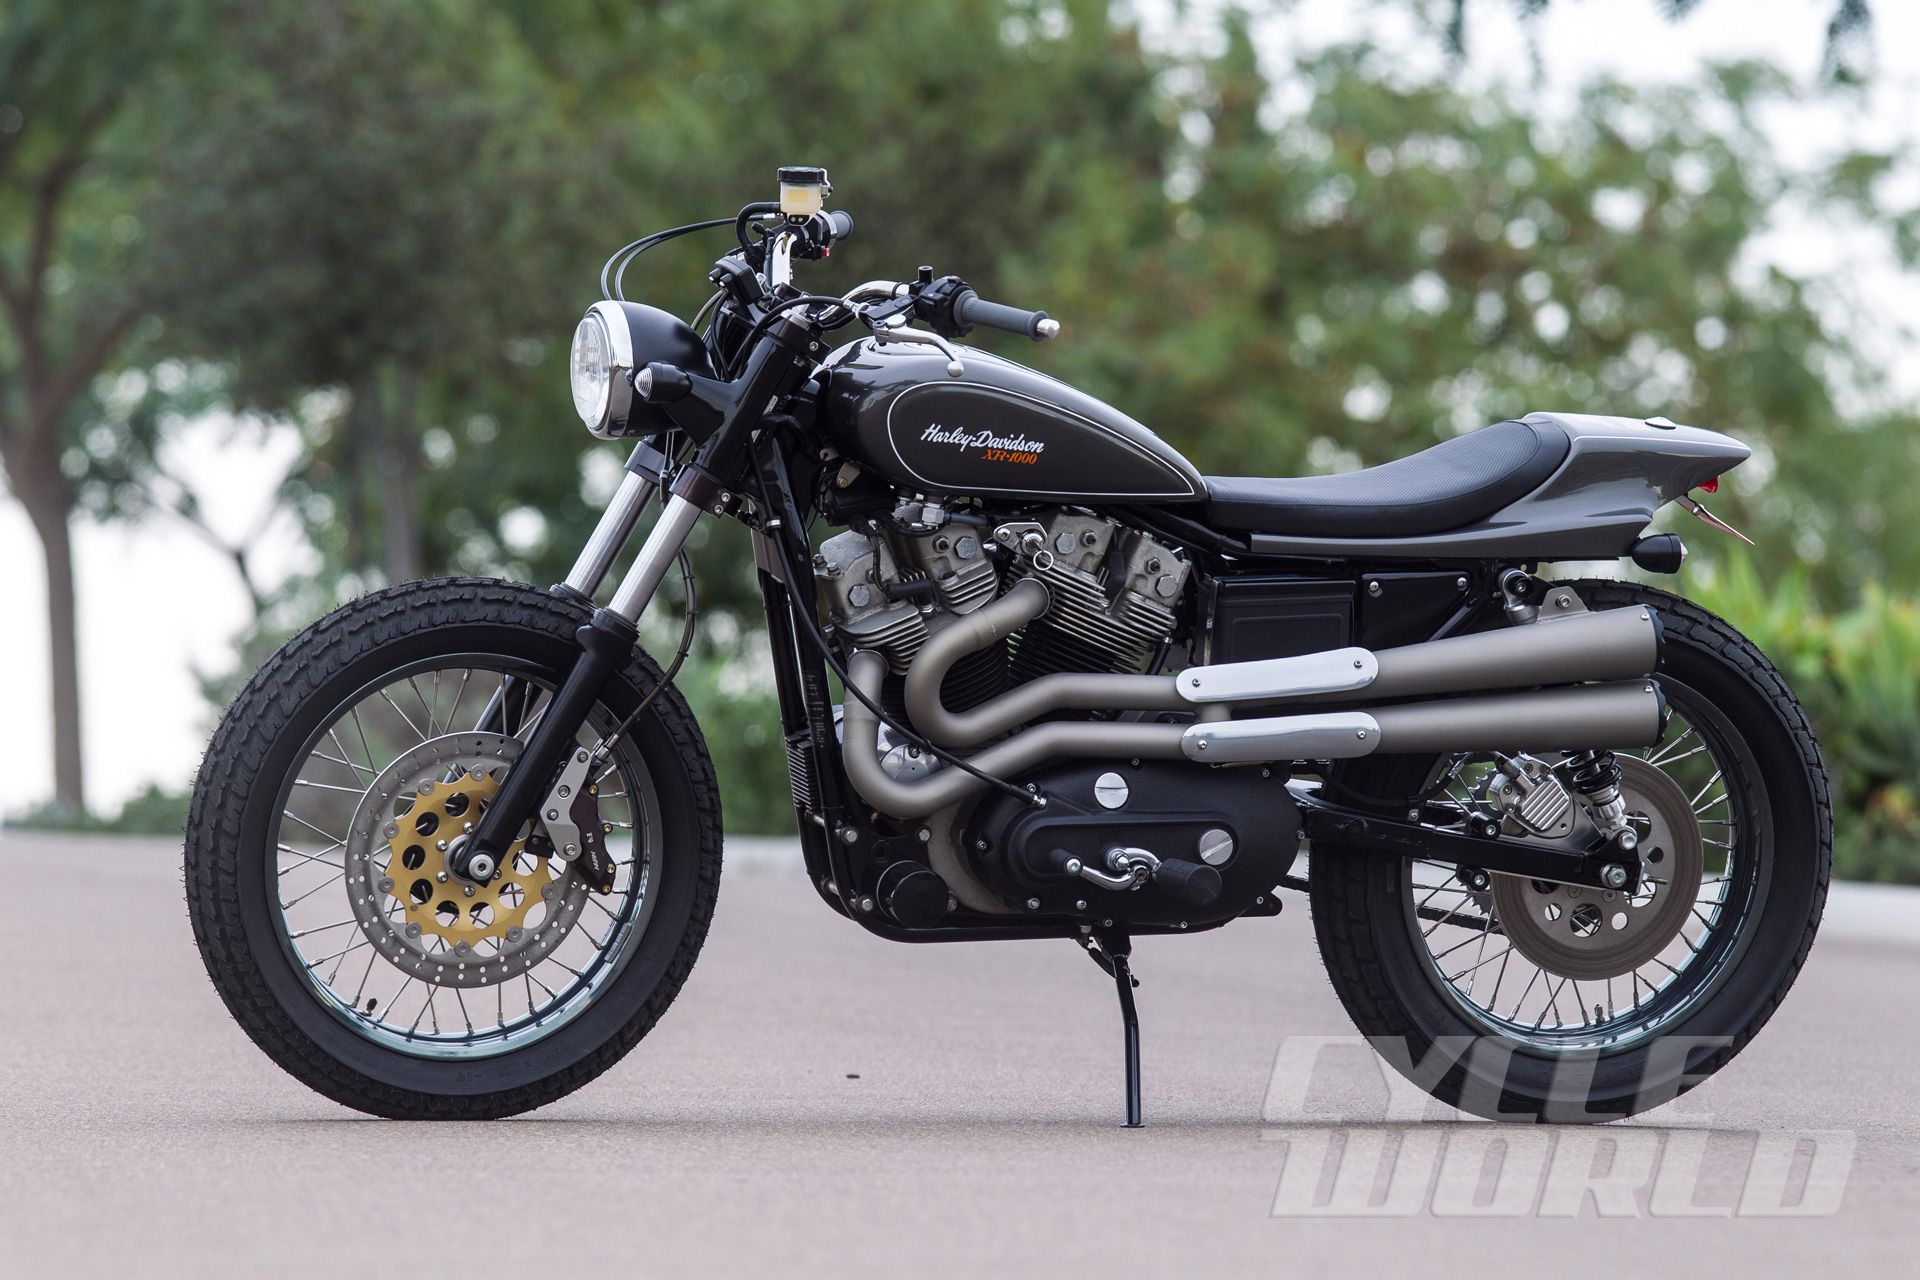 Harley Davidson Xr1000 Street Tracker By Mule Motorcycles Cycle World